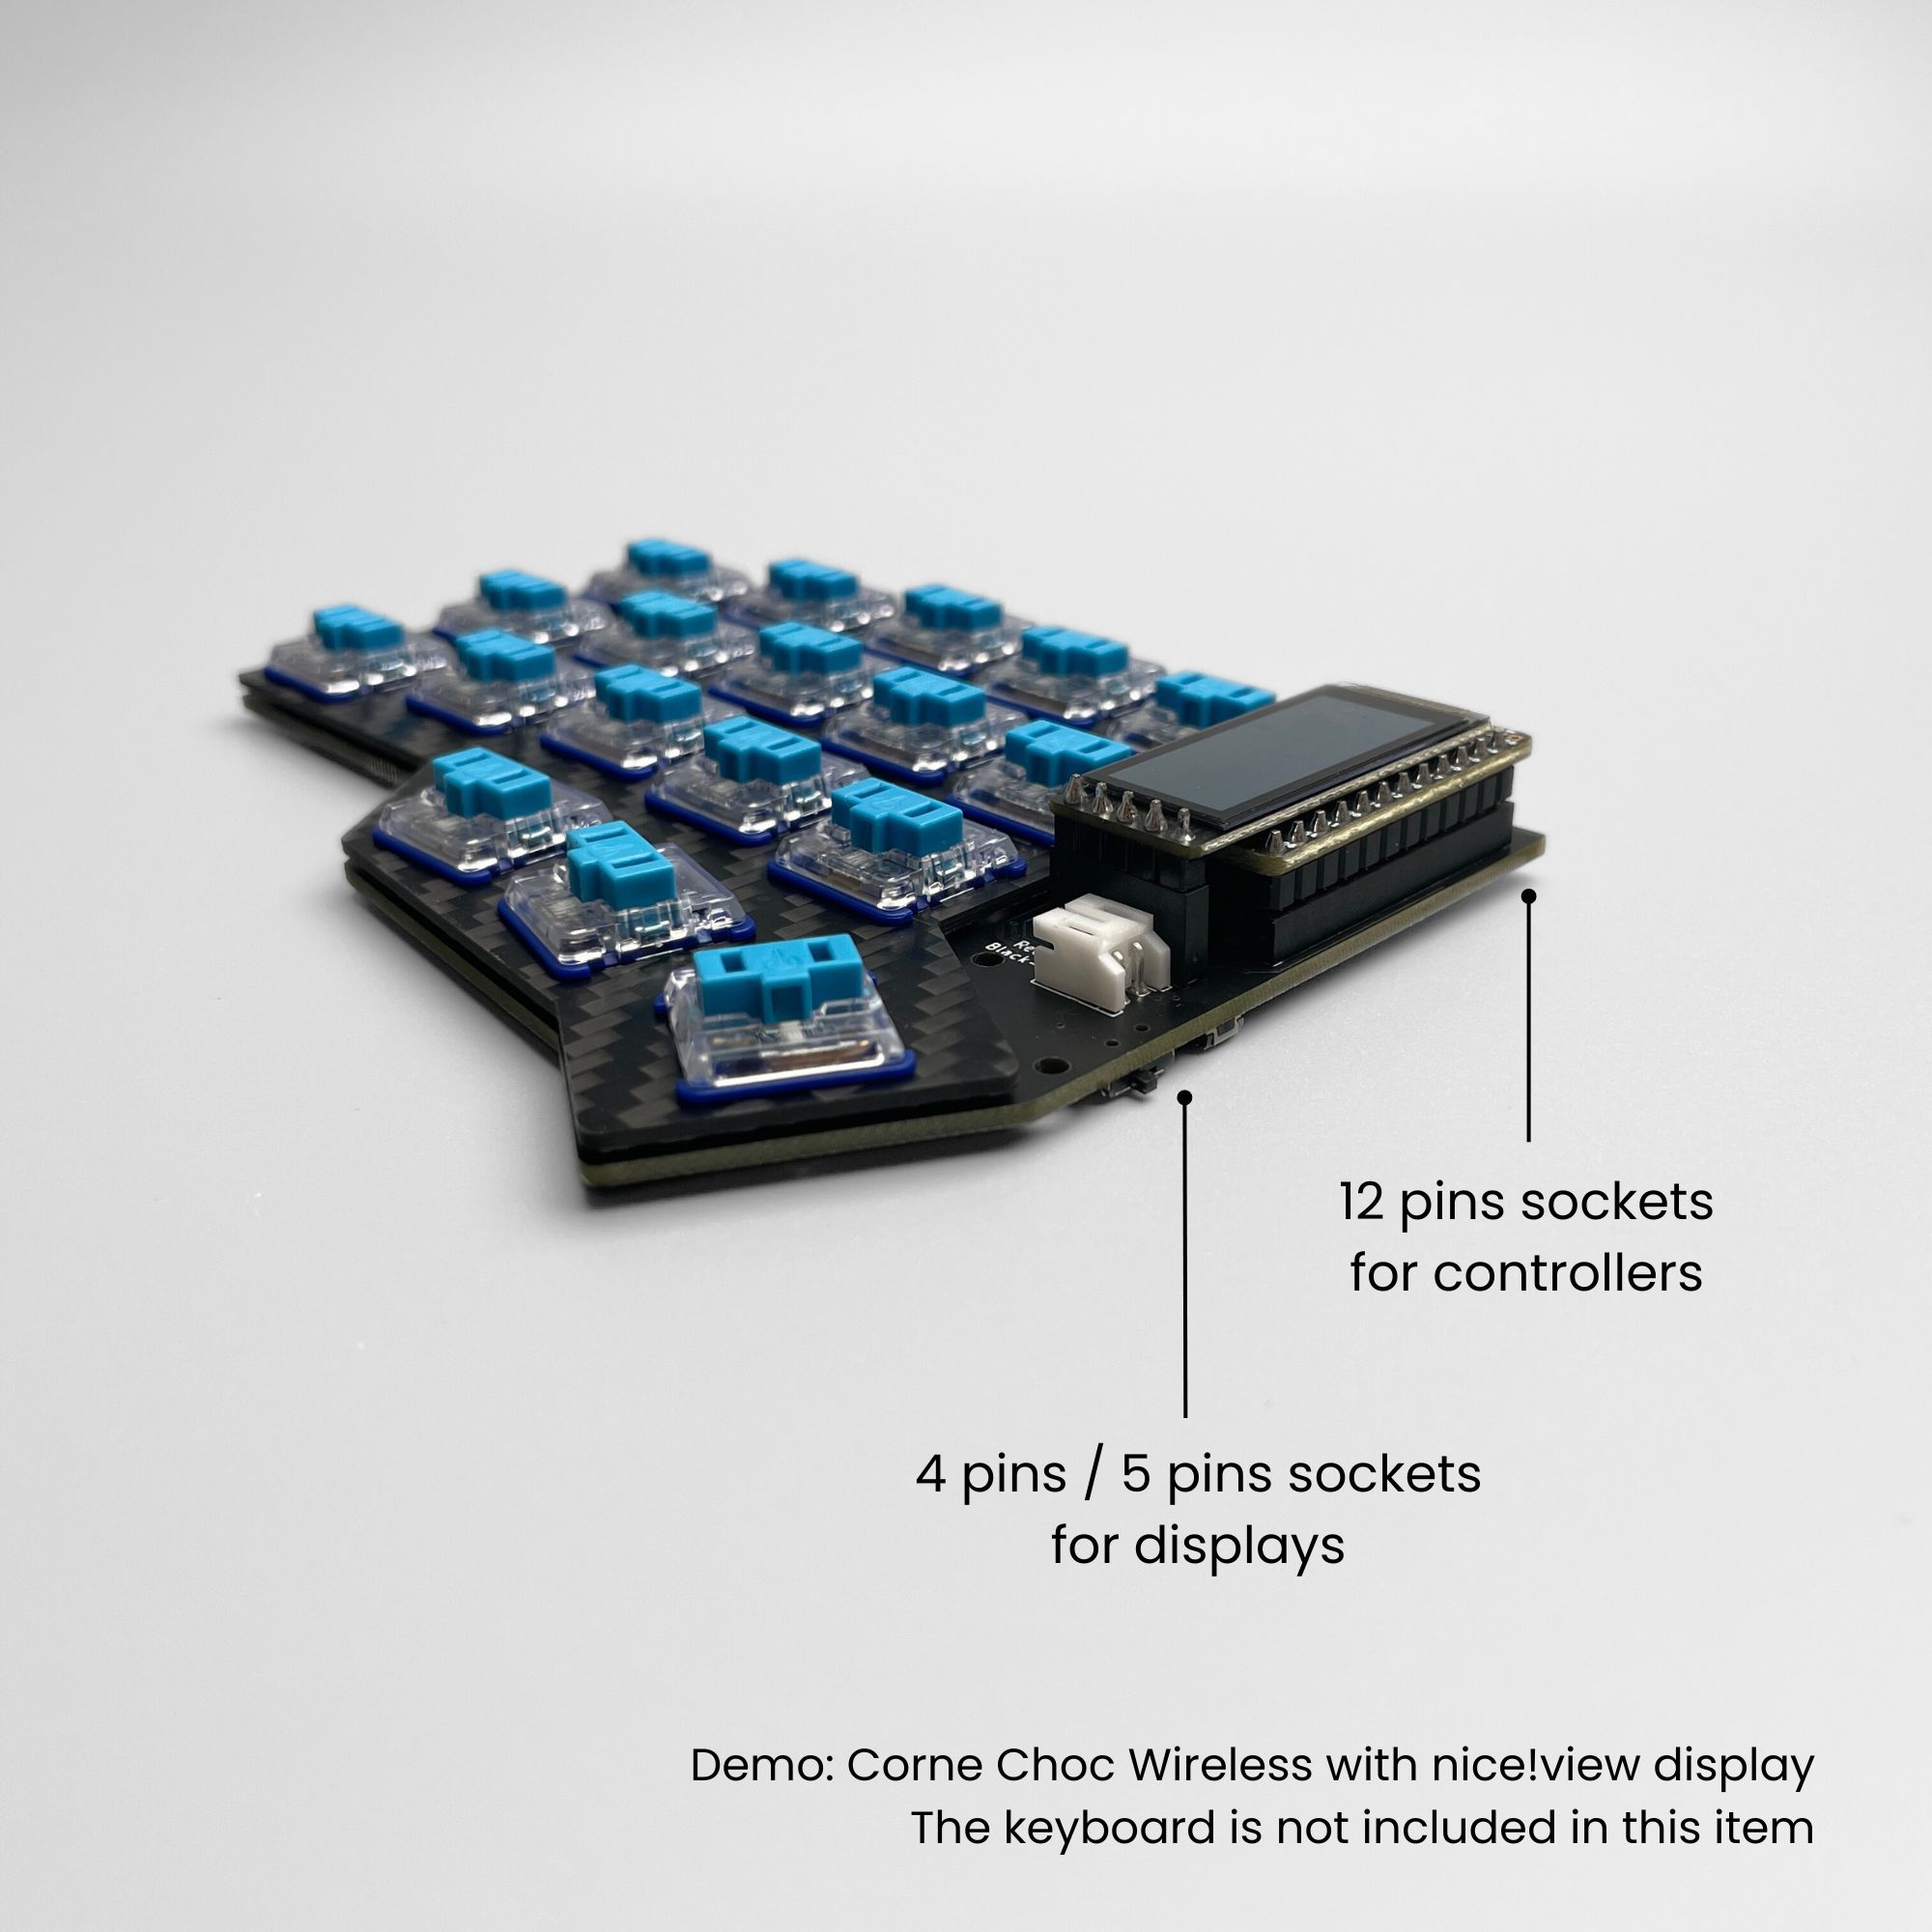 Controller and display sockets for split keyboard can be used with nice!nano, nice!view and RP2040 or pro-micro controller